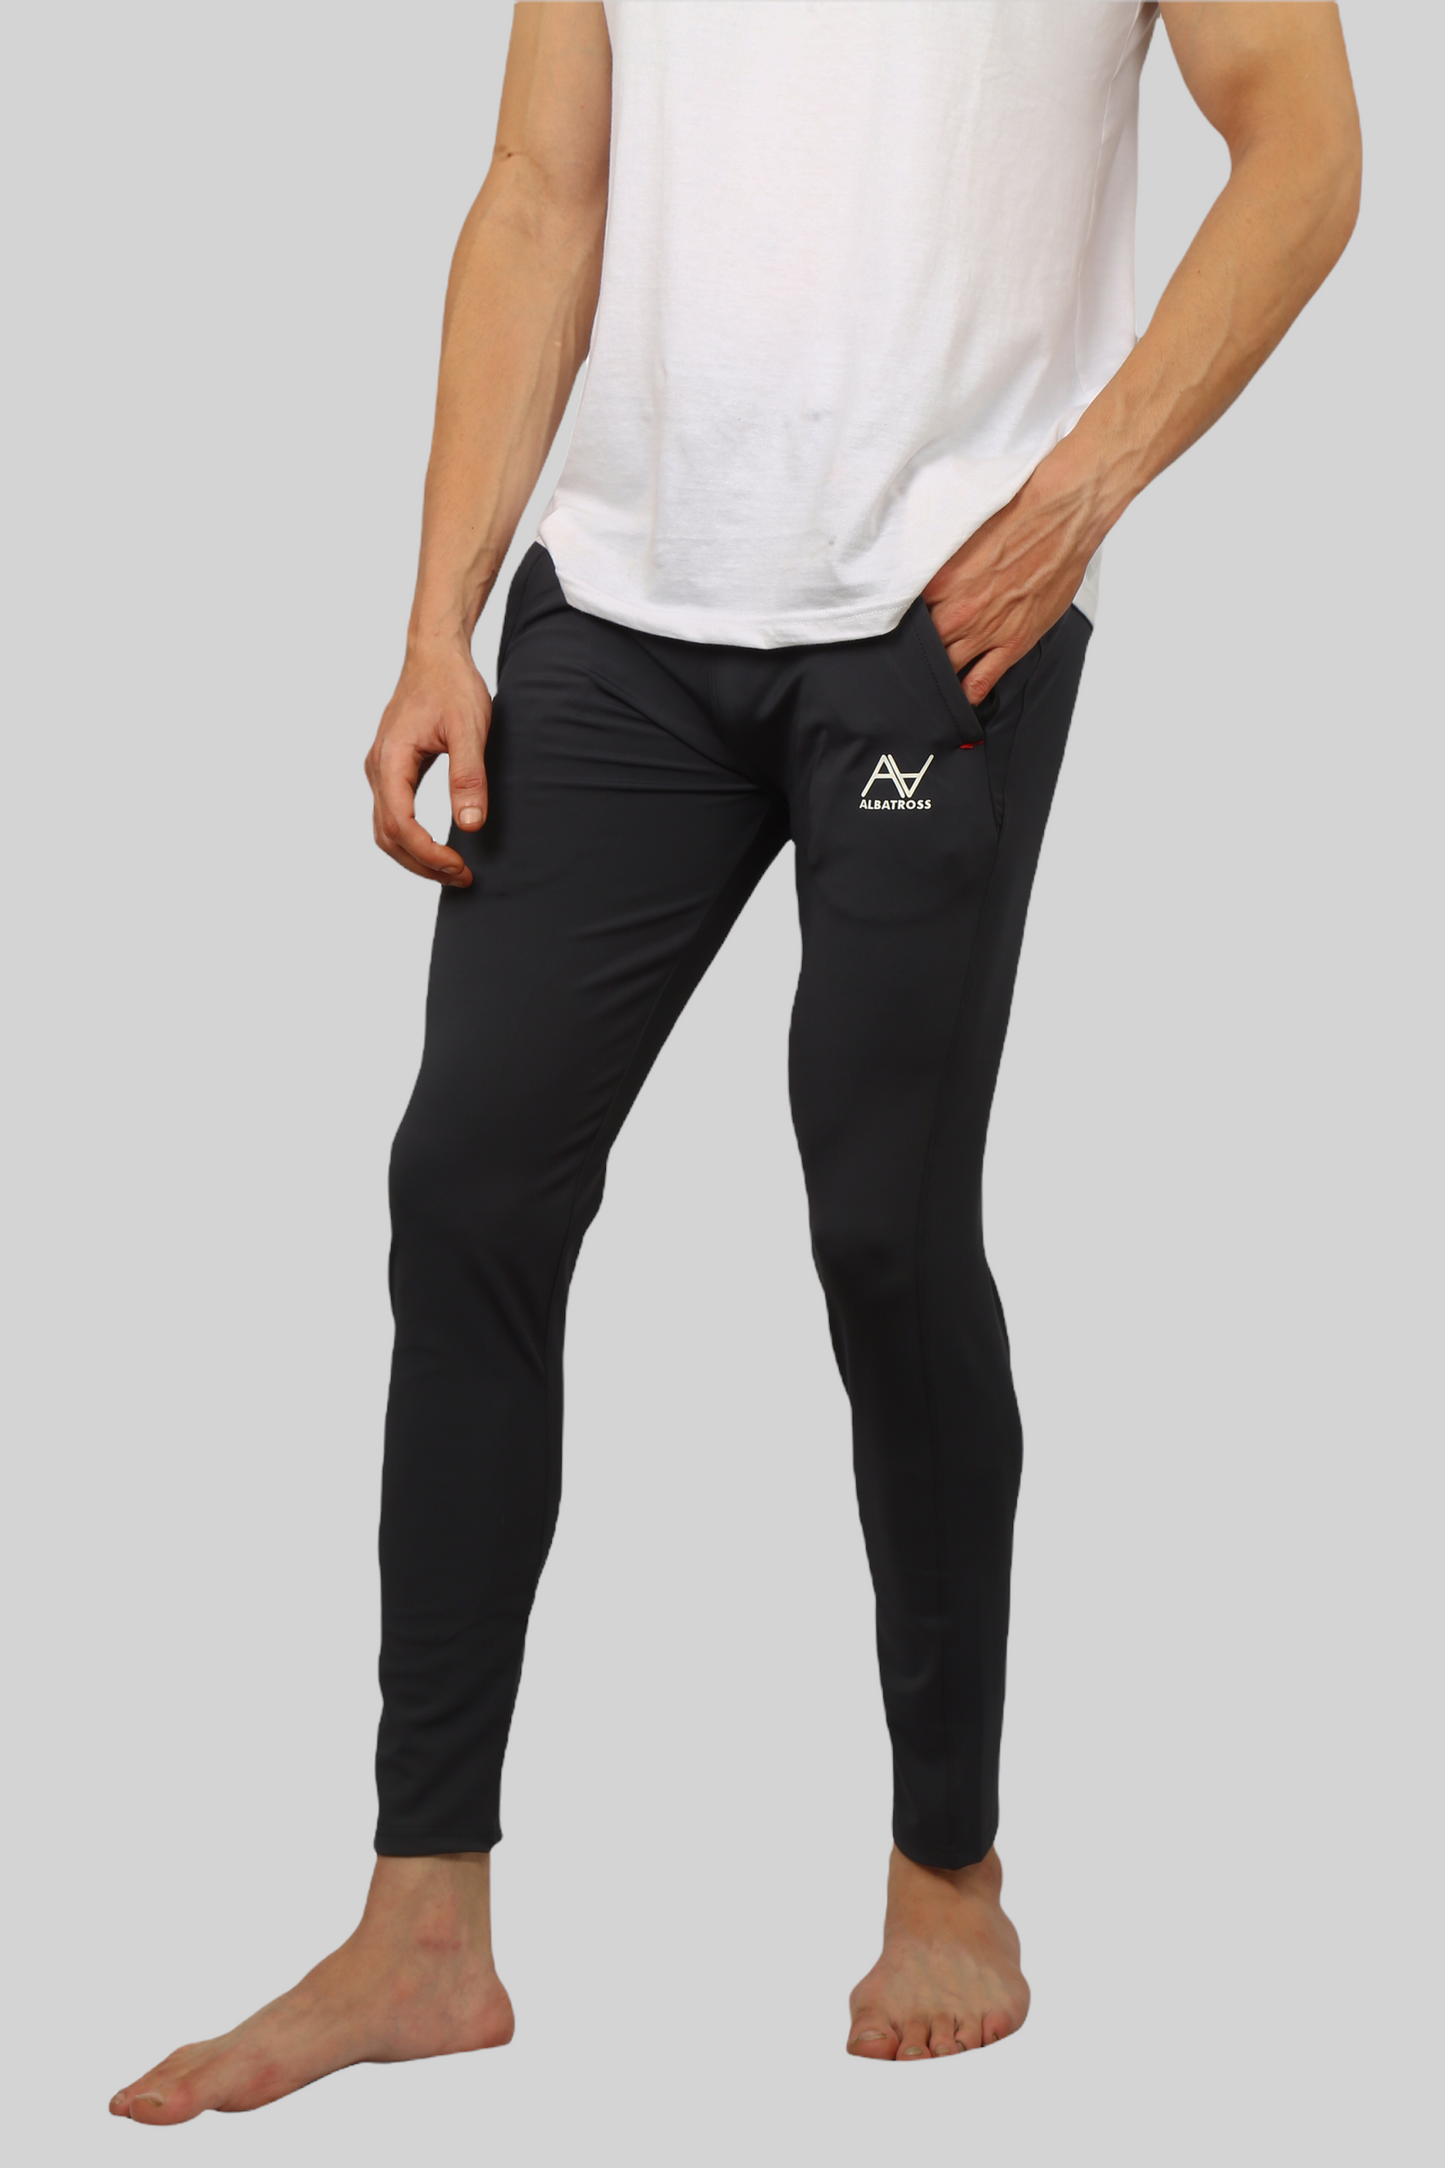 Dark Gray Active wear Dri-fit smooth and comfortable tracks for men